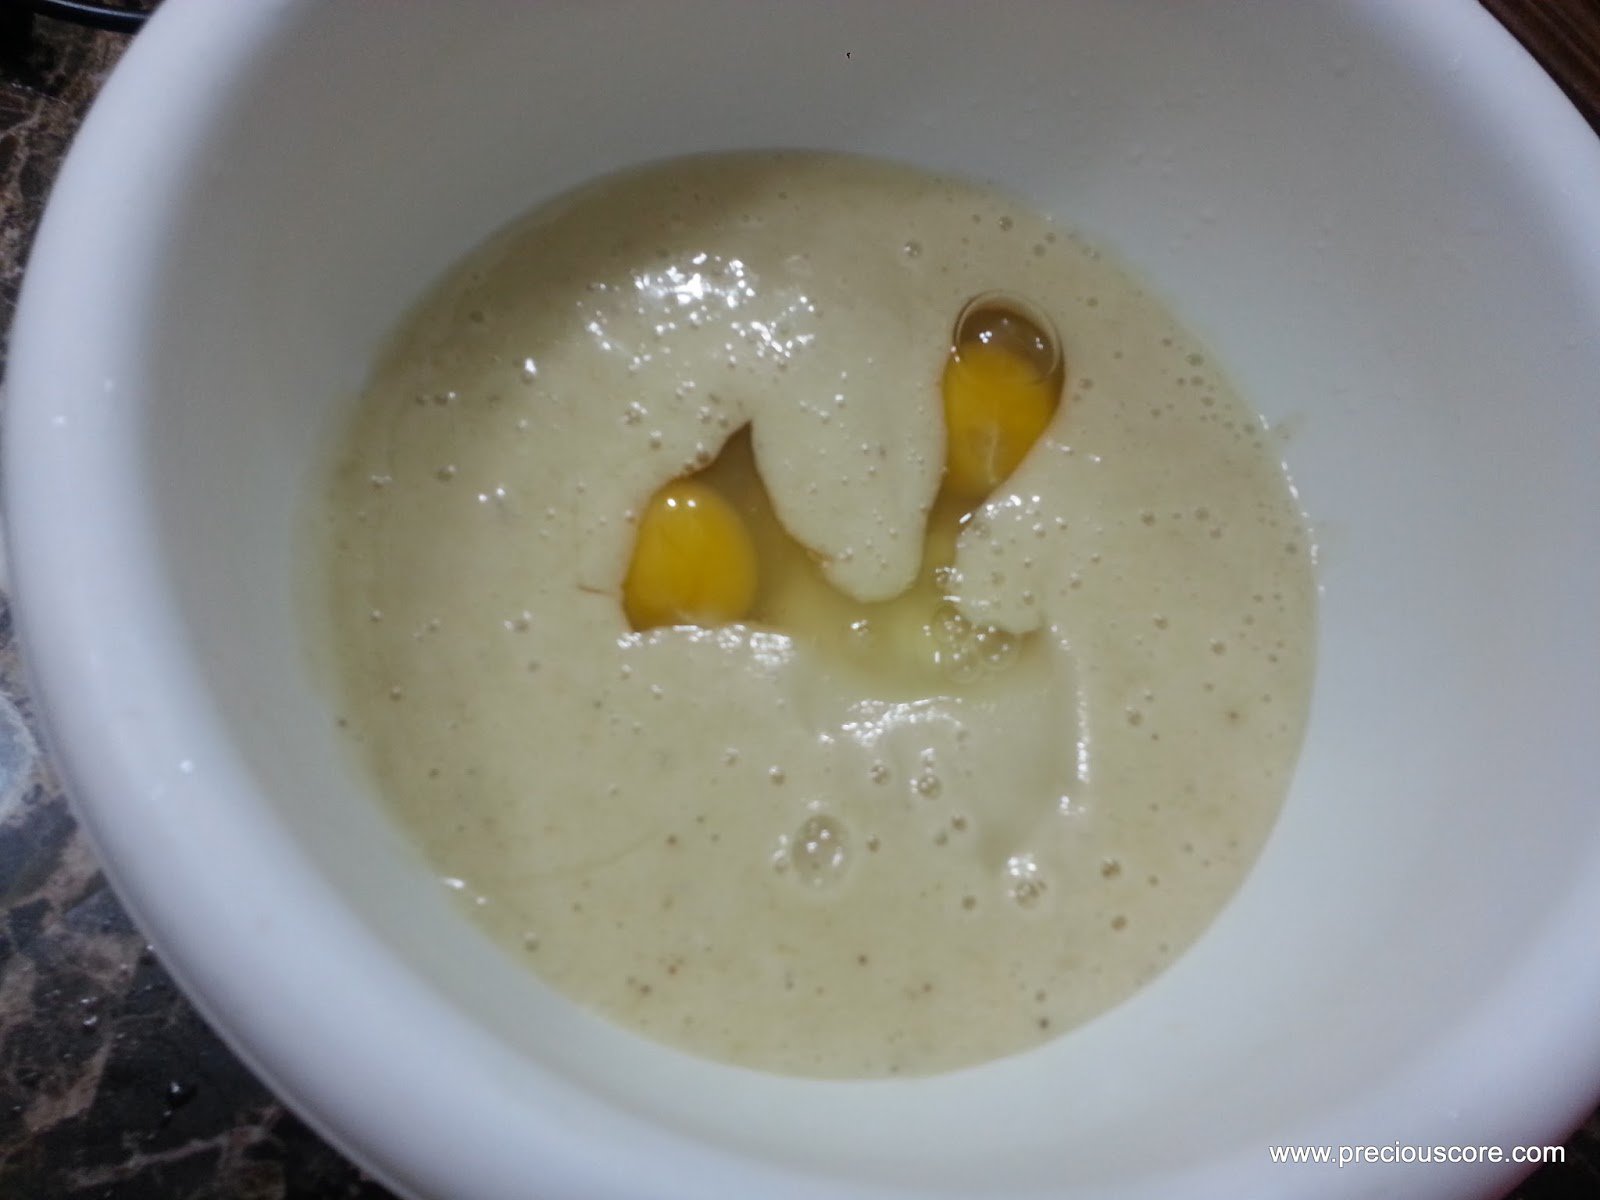 Eggs in a mixing bowl with a banana mixture.